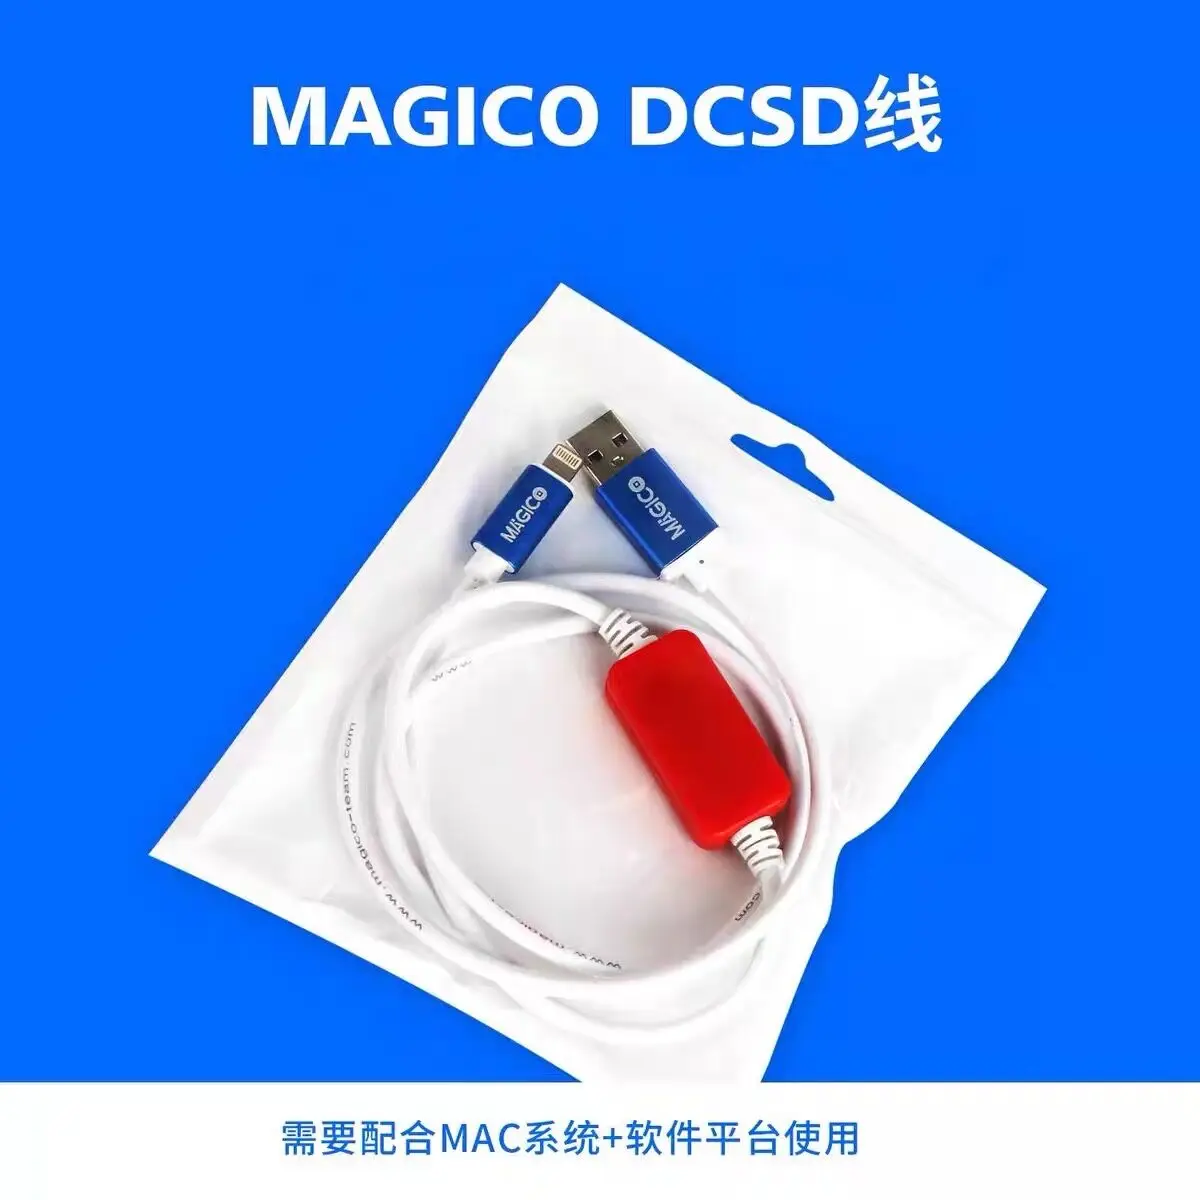 

MAGICO 2nd Generation DCSD Alex Cable Test Engineering Cable Purple Screen Cable for iPhone to Rewrite Nand Data to SysCfg